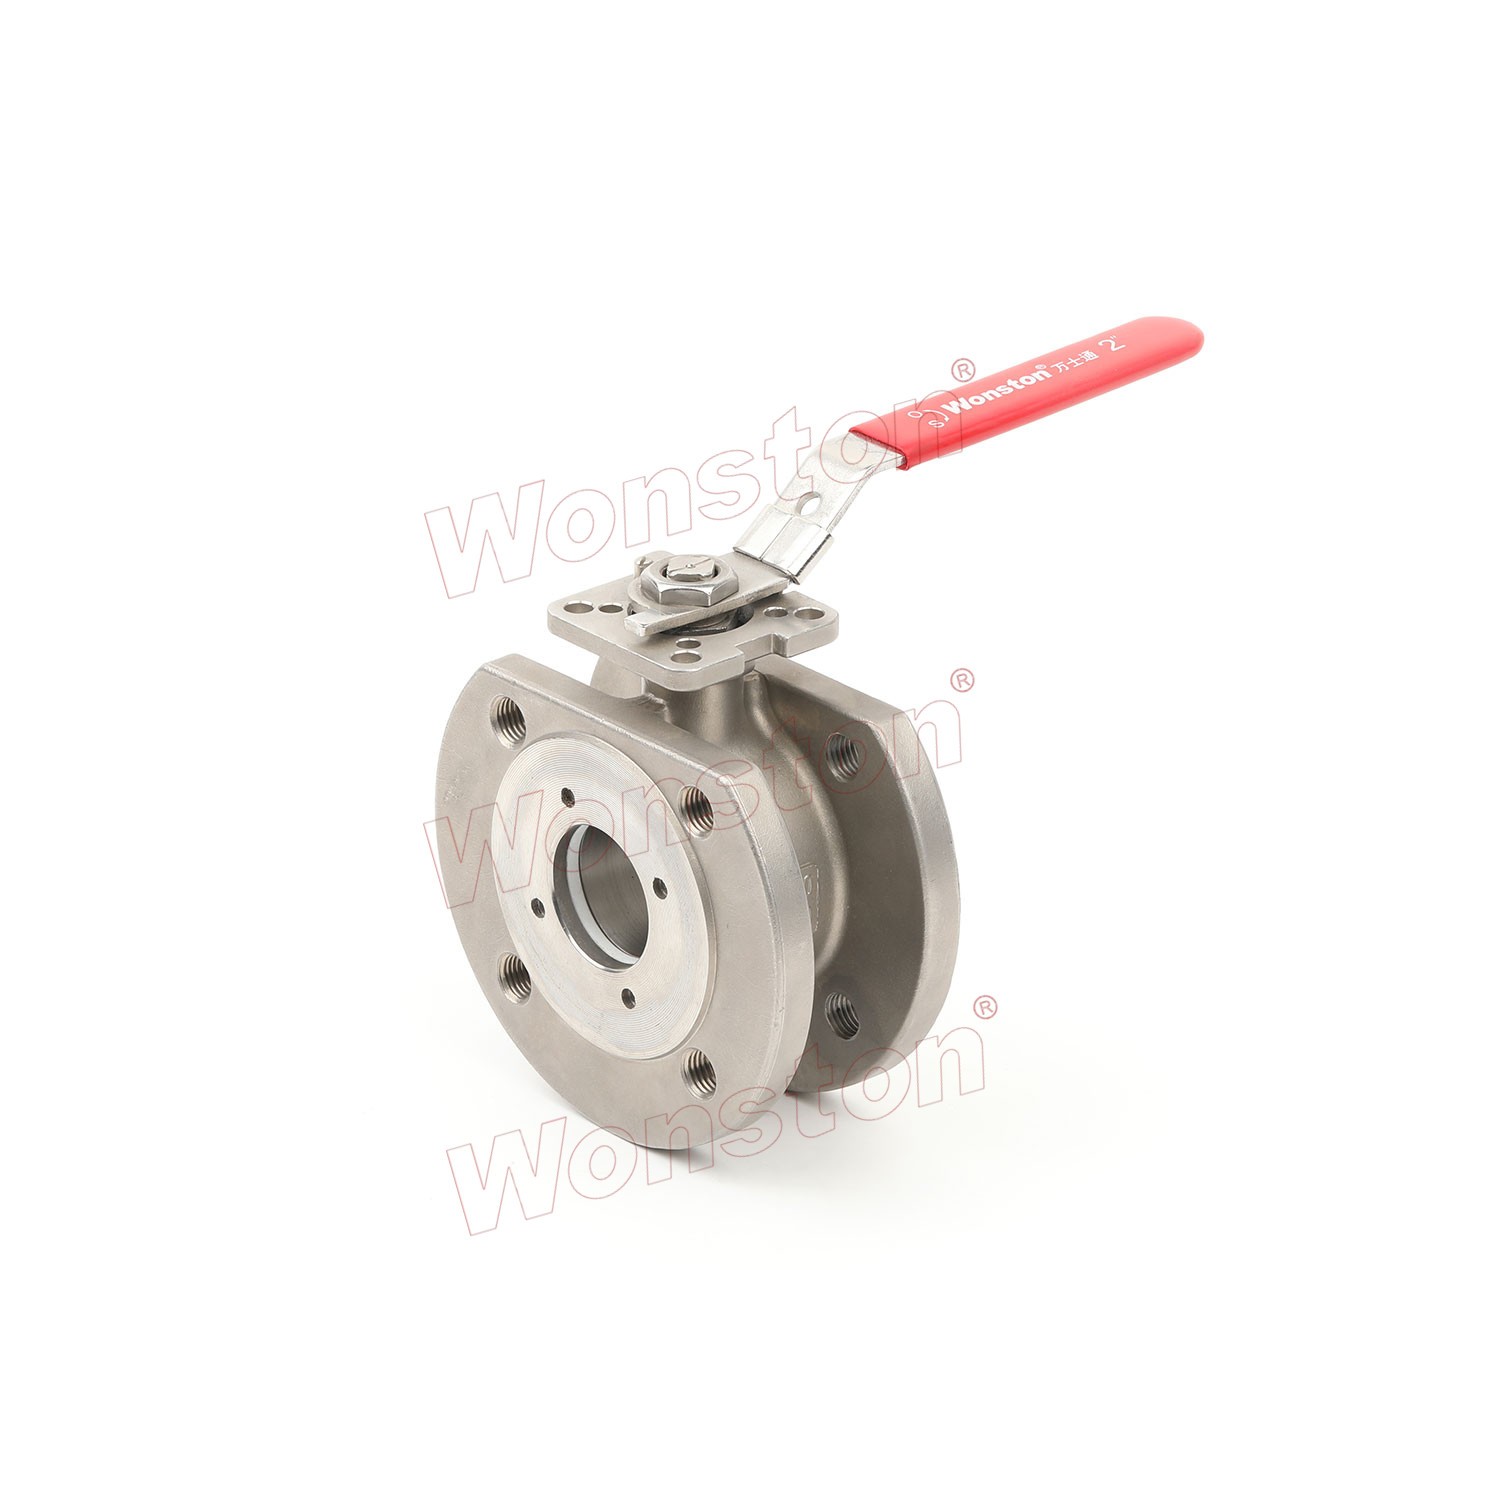 Wafer Type Ball Valve With Direct Mounting Pad